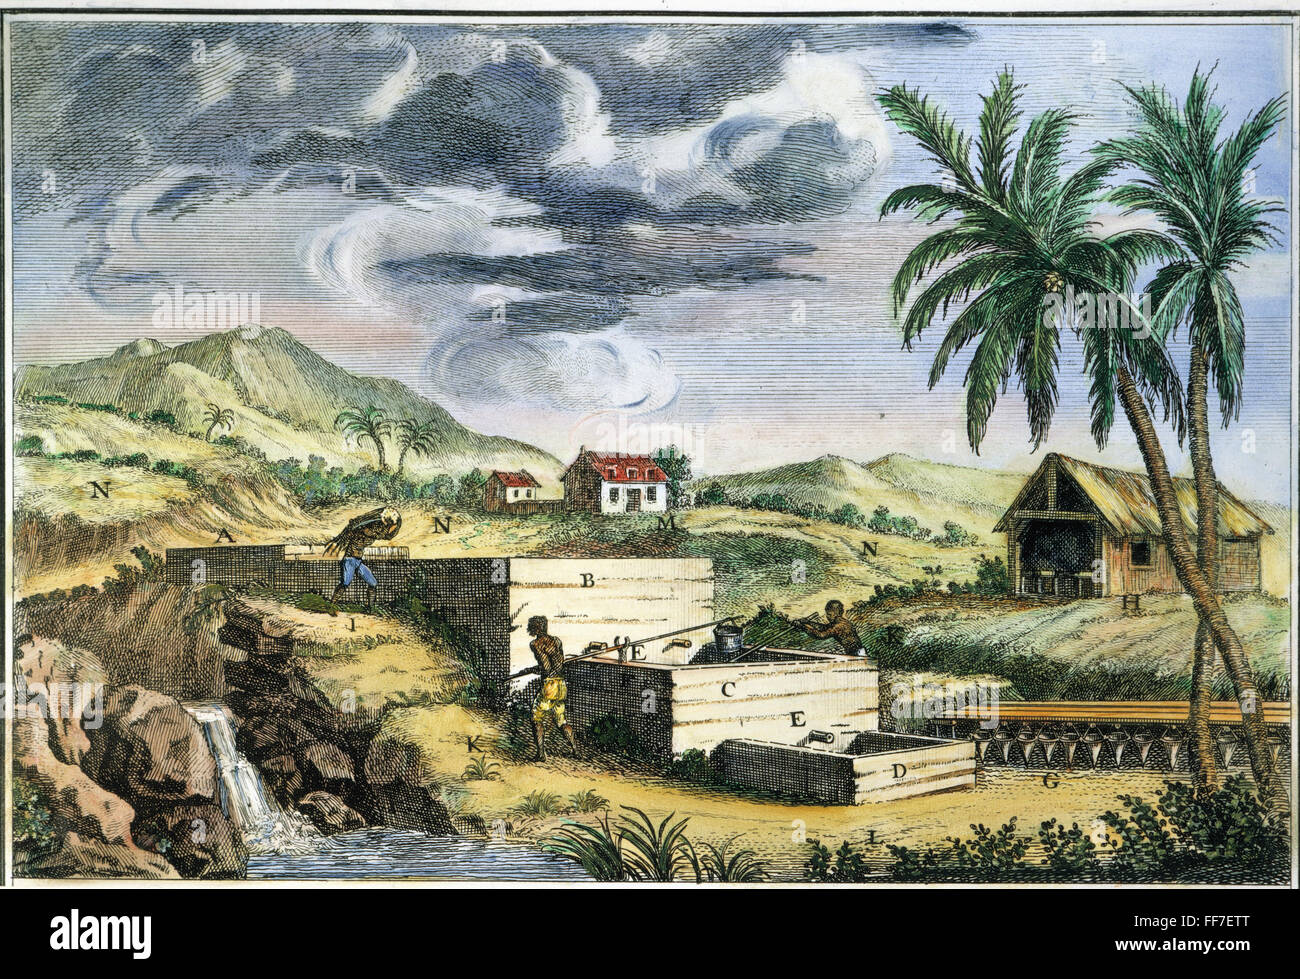 INDIGO PLANTATION. /nBlack slaves working on an indigo plantation in the West Indies. Fresh water in a series of leaching vats extracts the dye from the plant. Color French line engraving, 18th century. Stock Photo